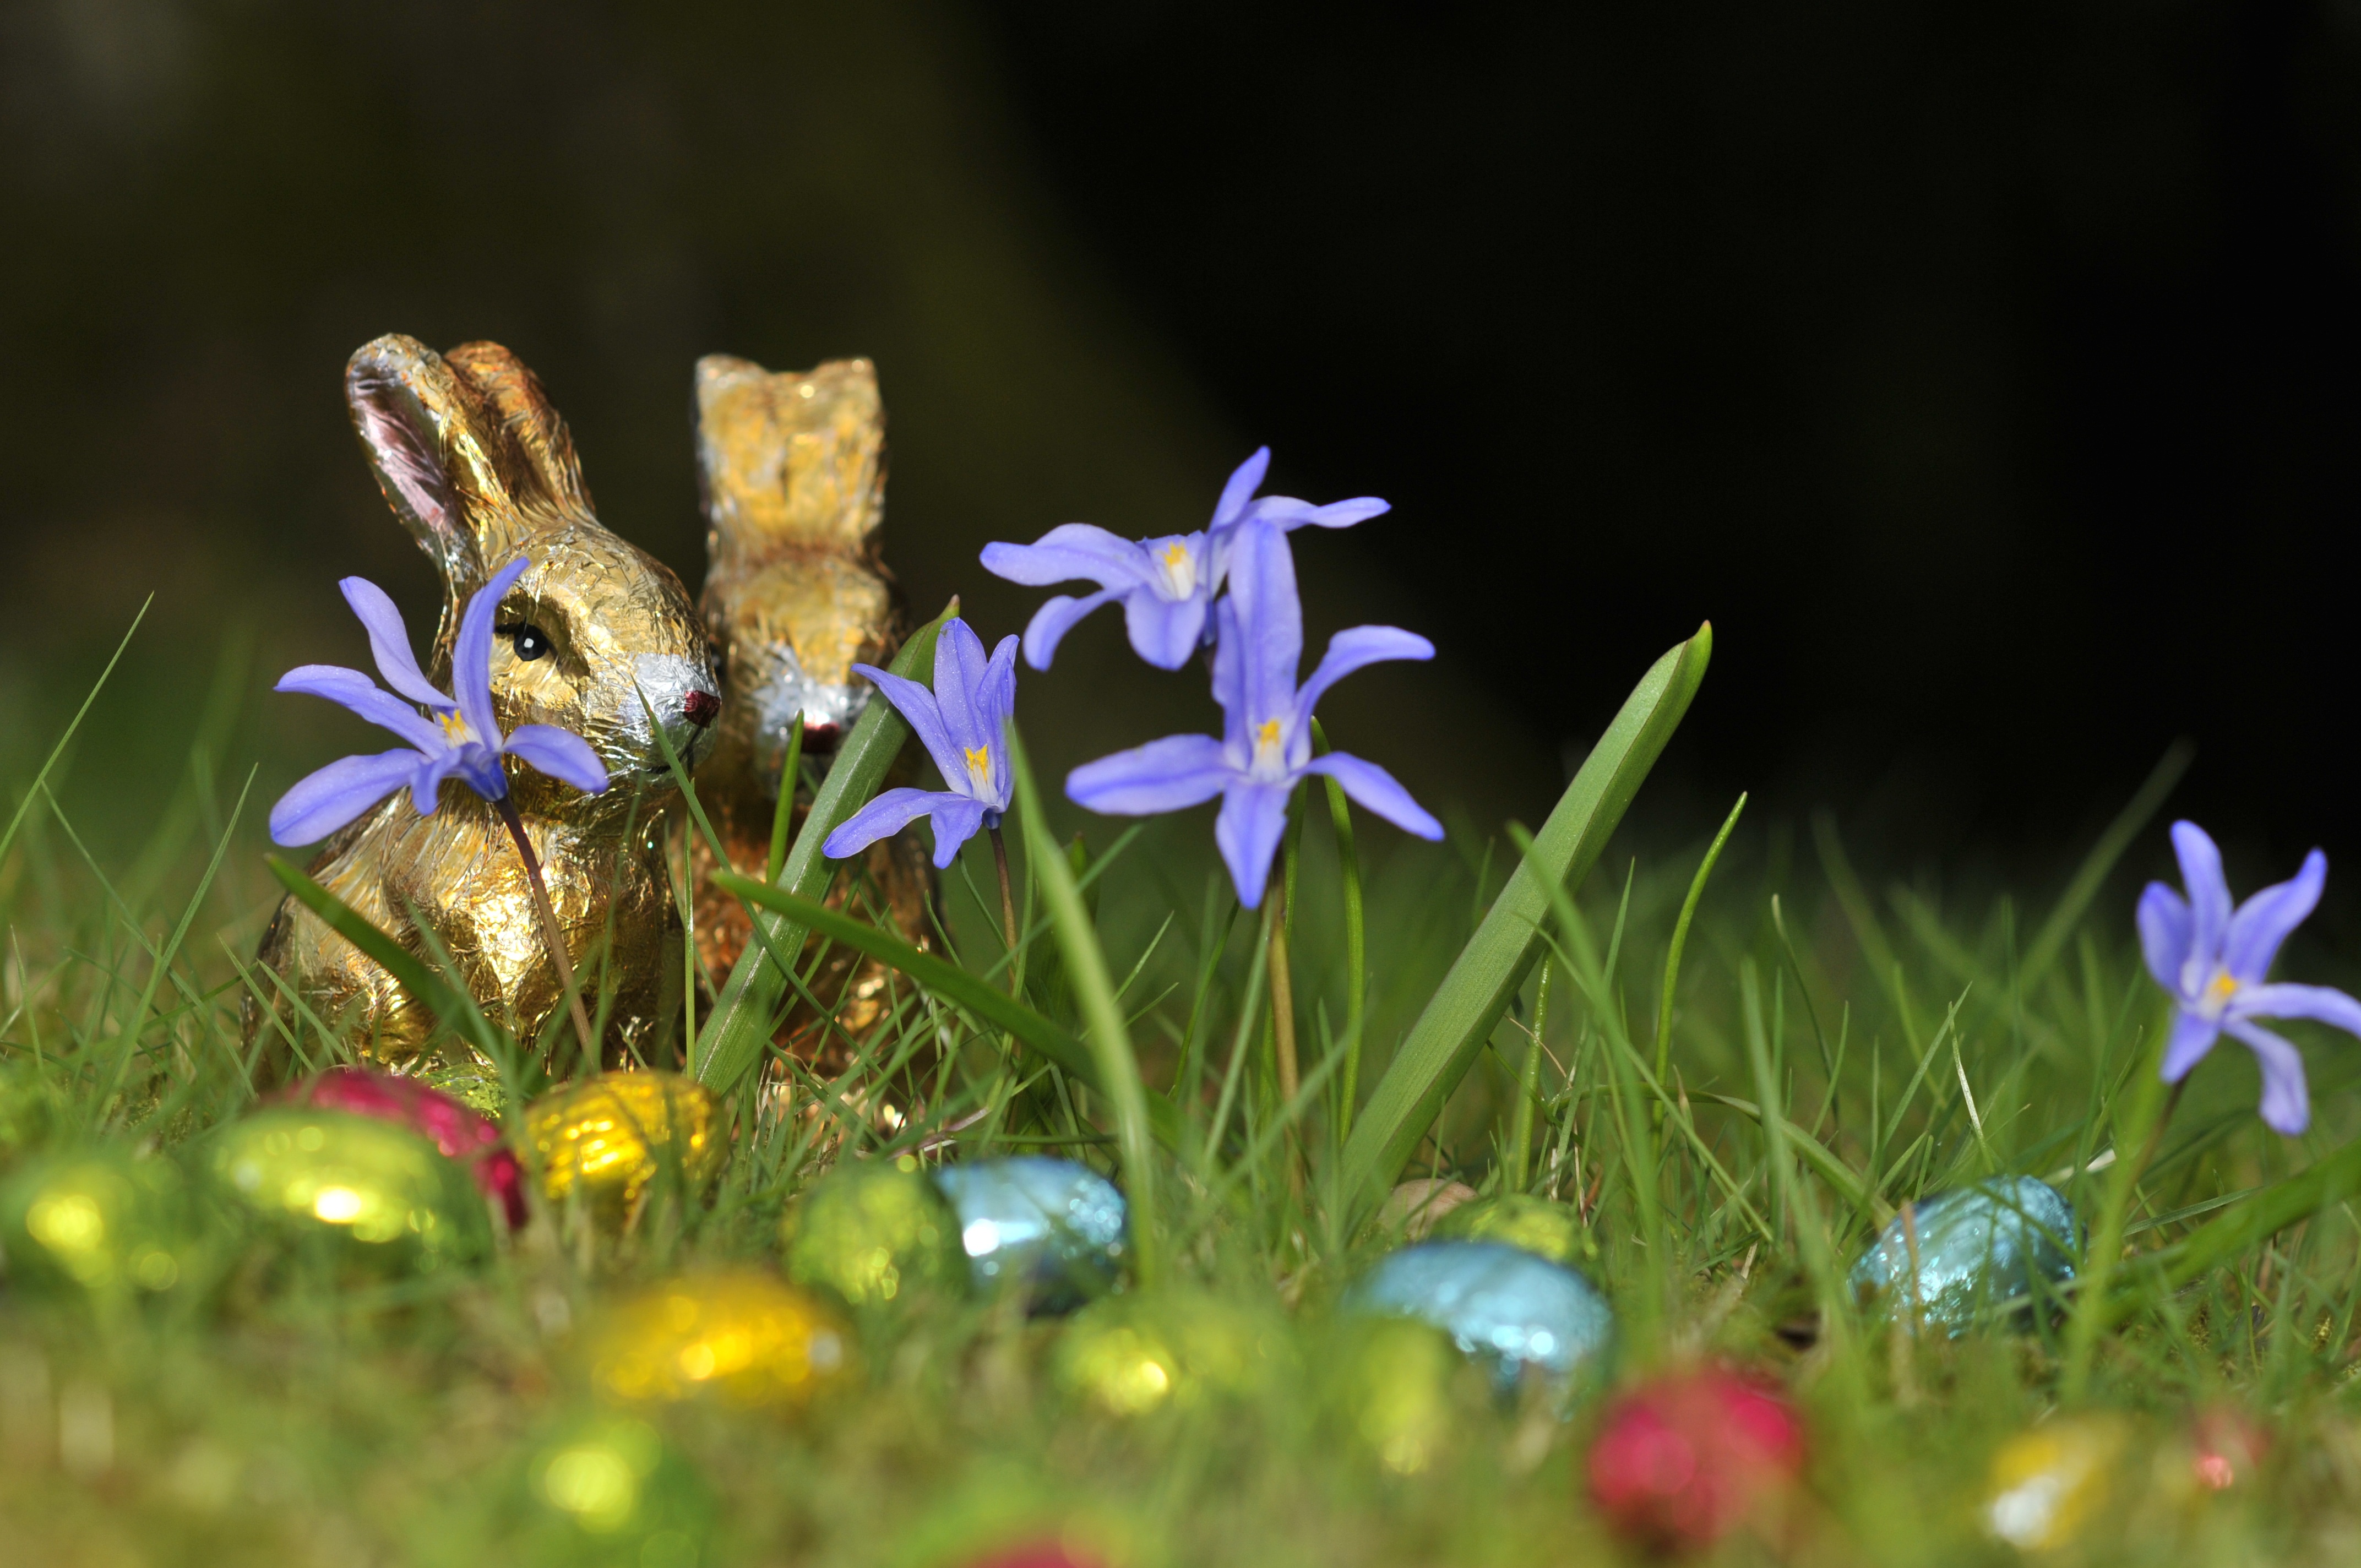 53929 Screensavers and Wallpapers Easter for phone. Download holidays, flowers, grass, eggs, easter, chocolate bunnies, chocolate hares pictures for free